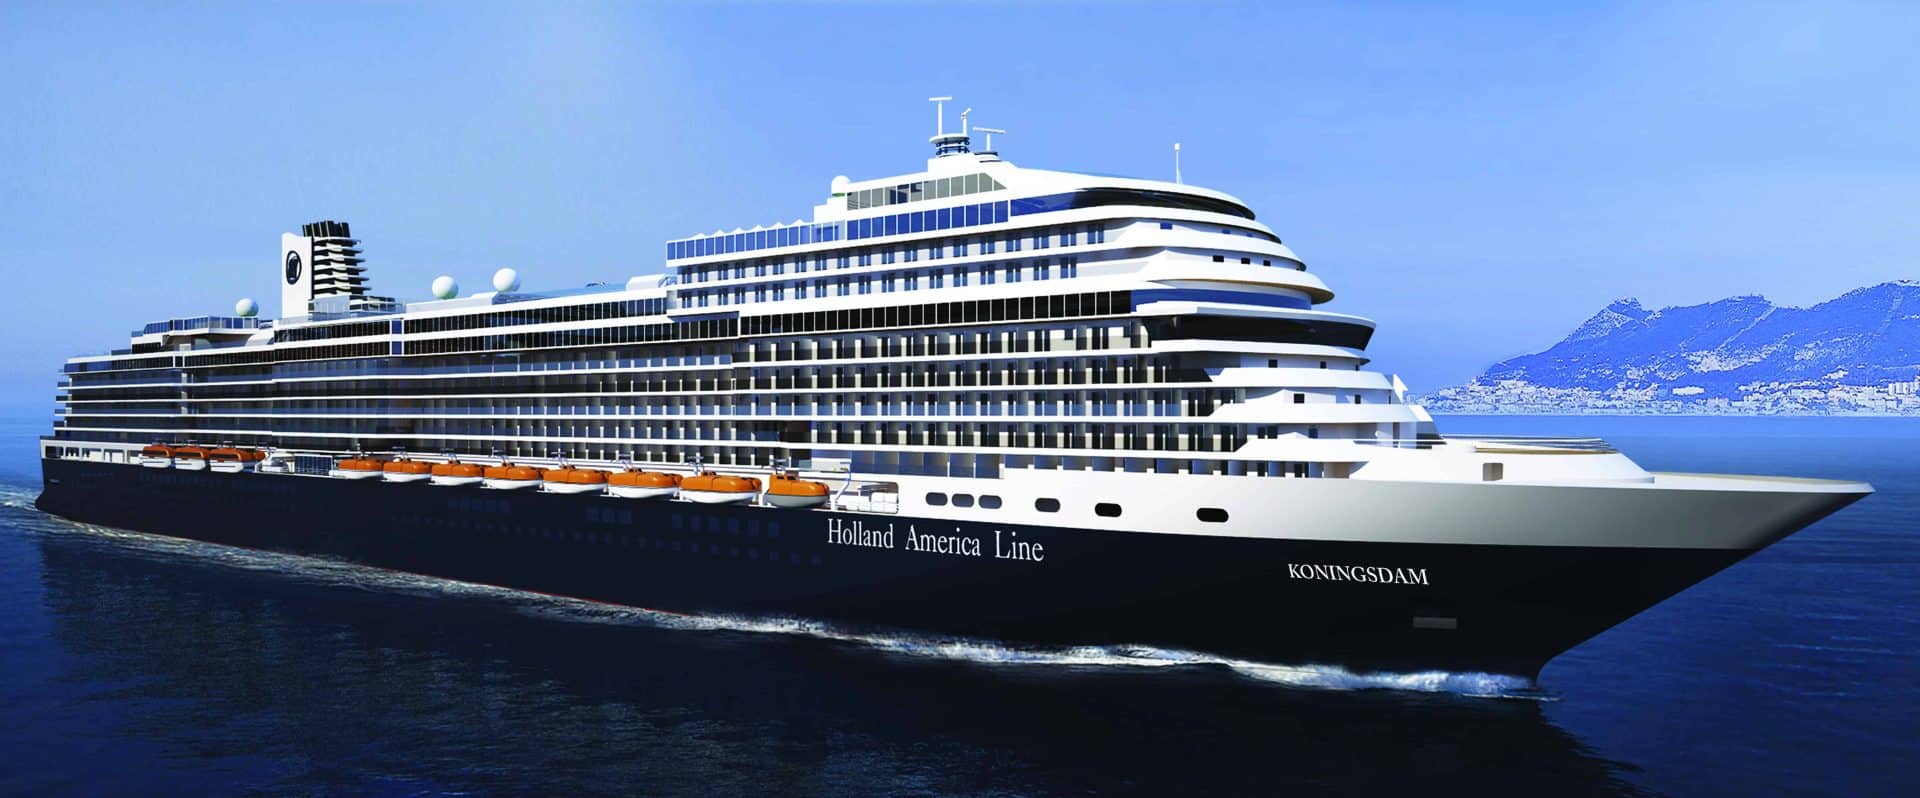 Holland America Line's Popular Ready Set Sail Promotion Offers PrePaid